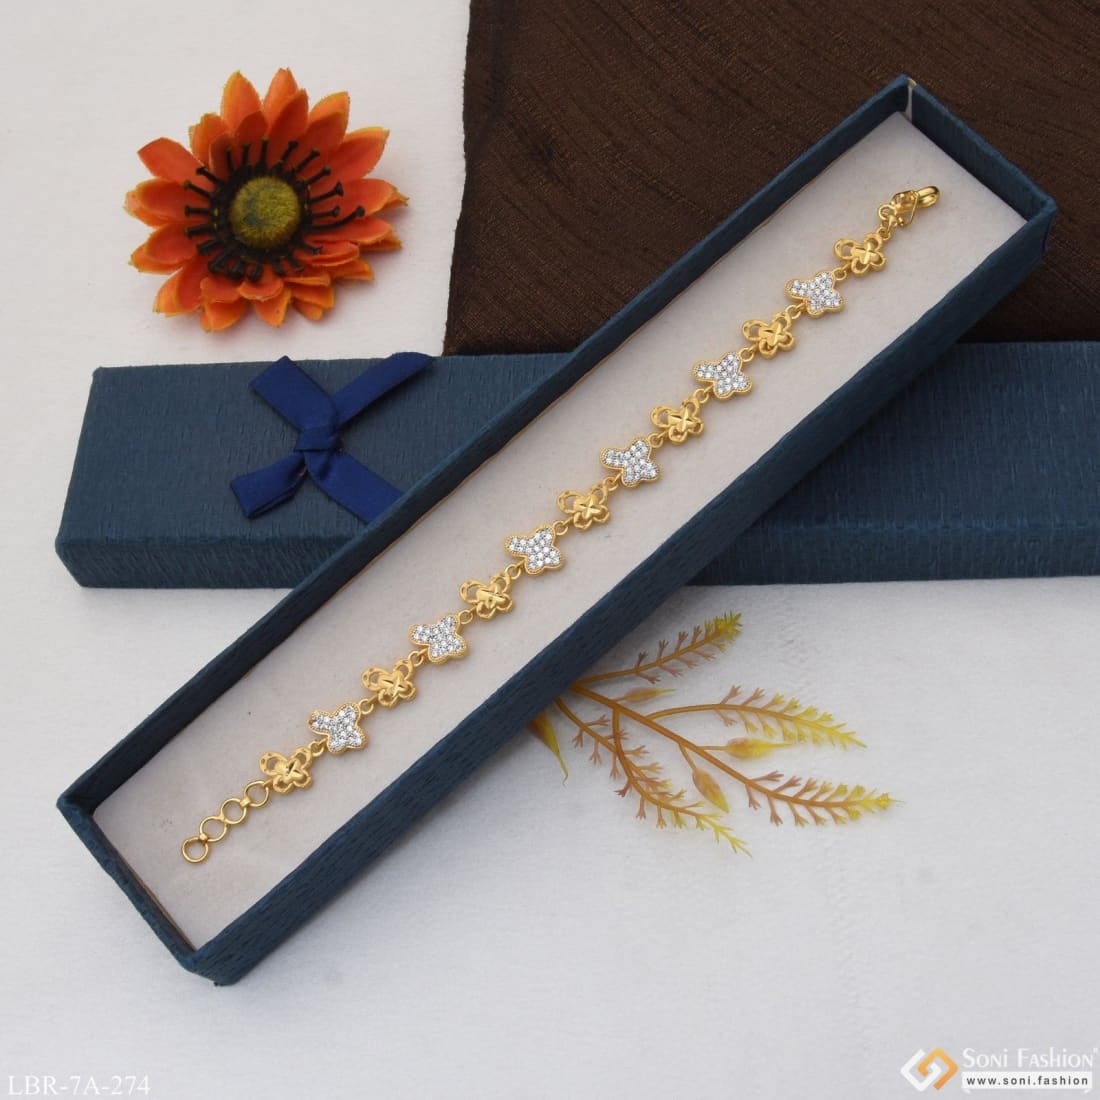 Latest Gold Bracelet Designs With Price and Weight - People choice